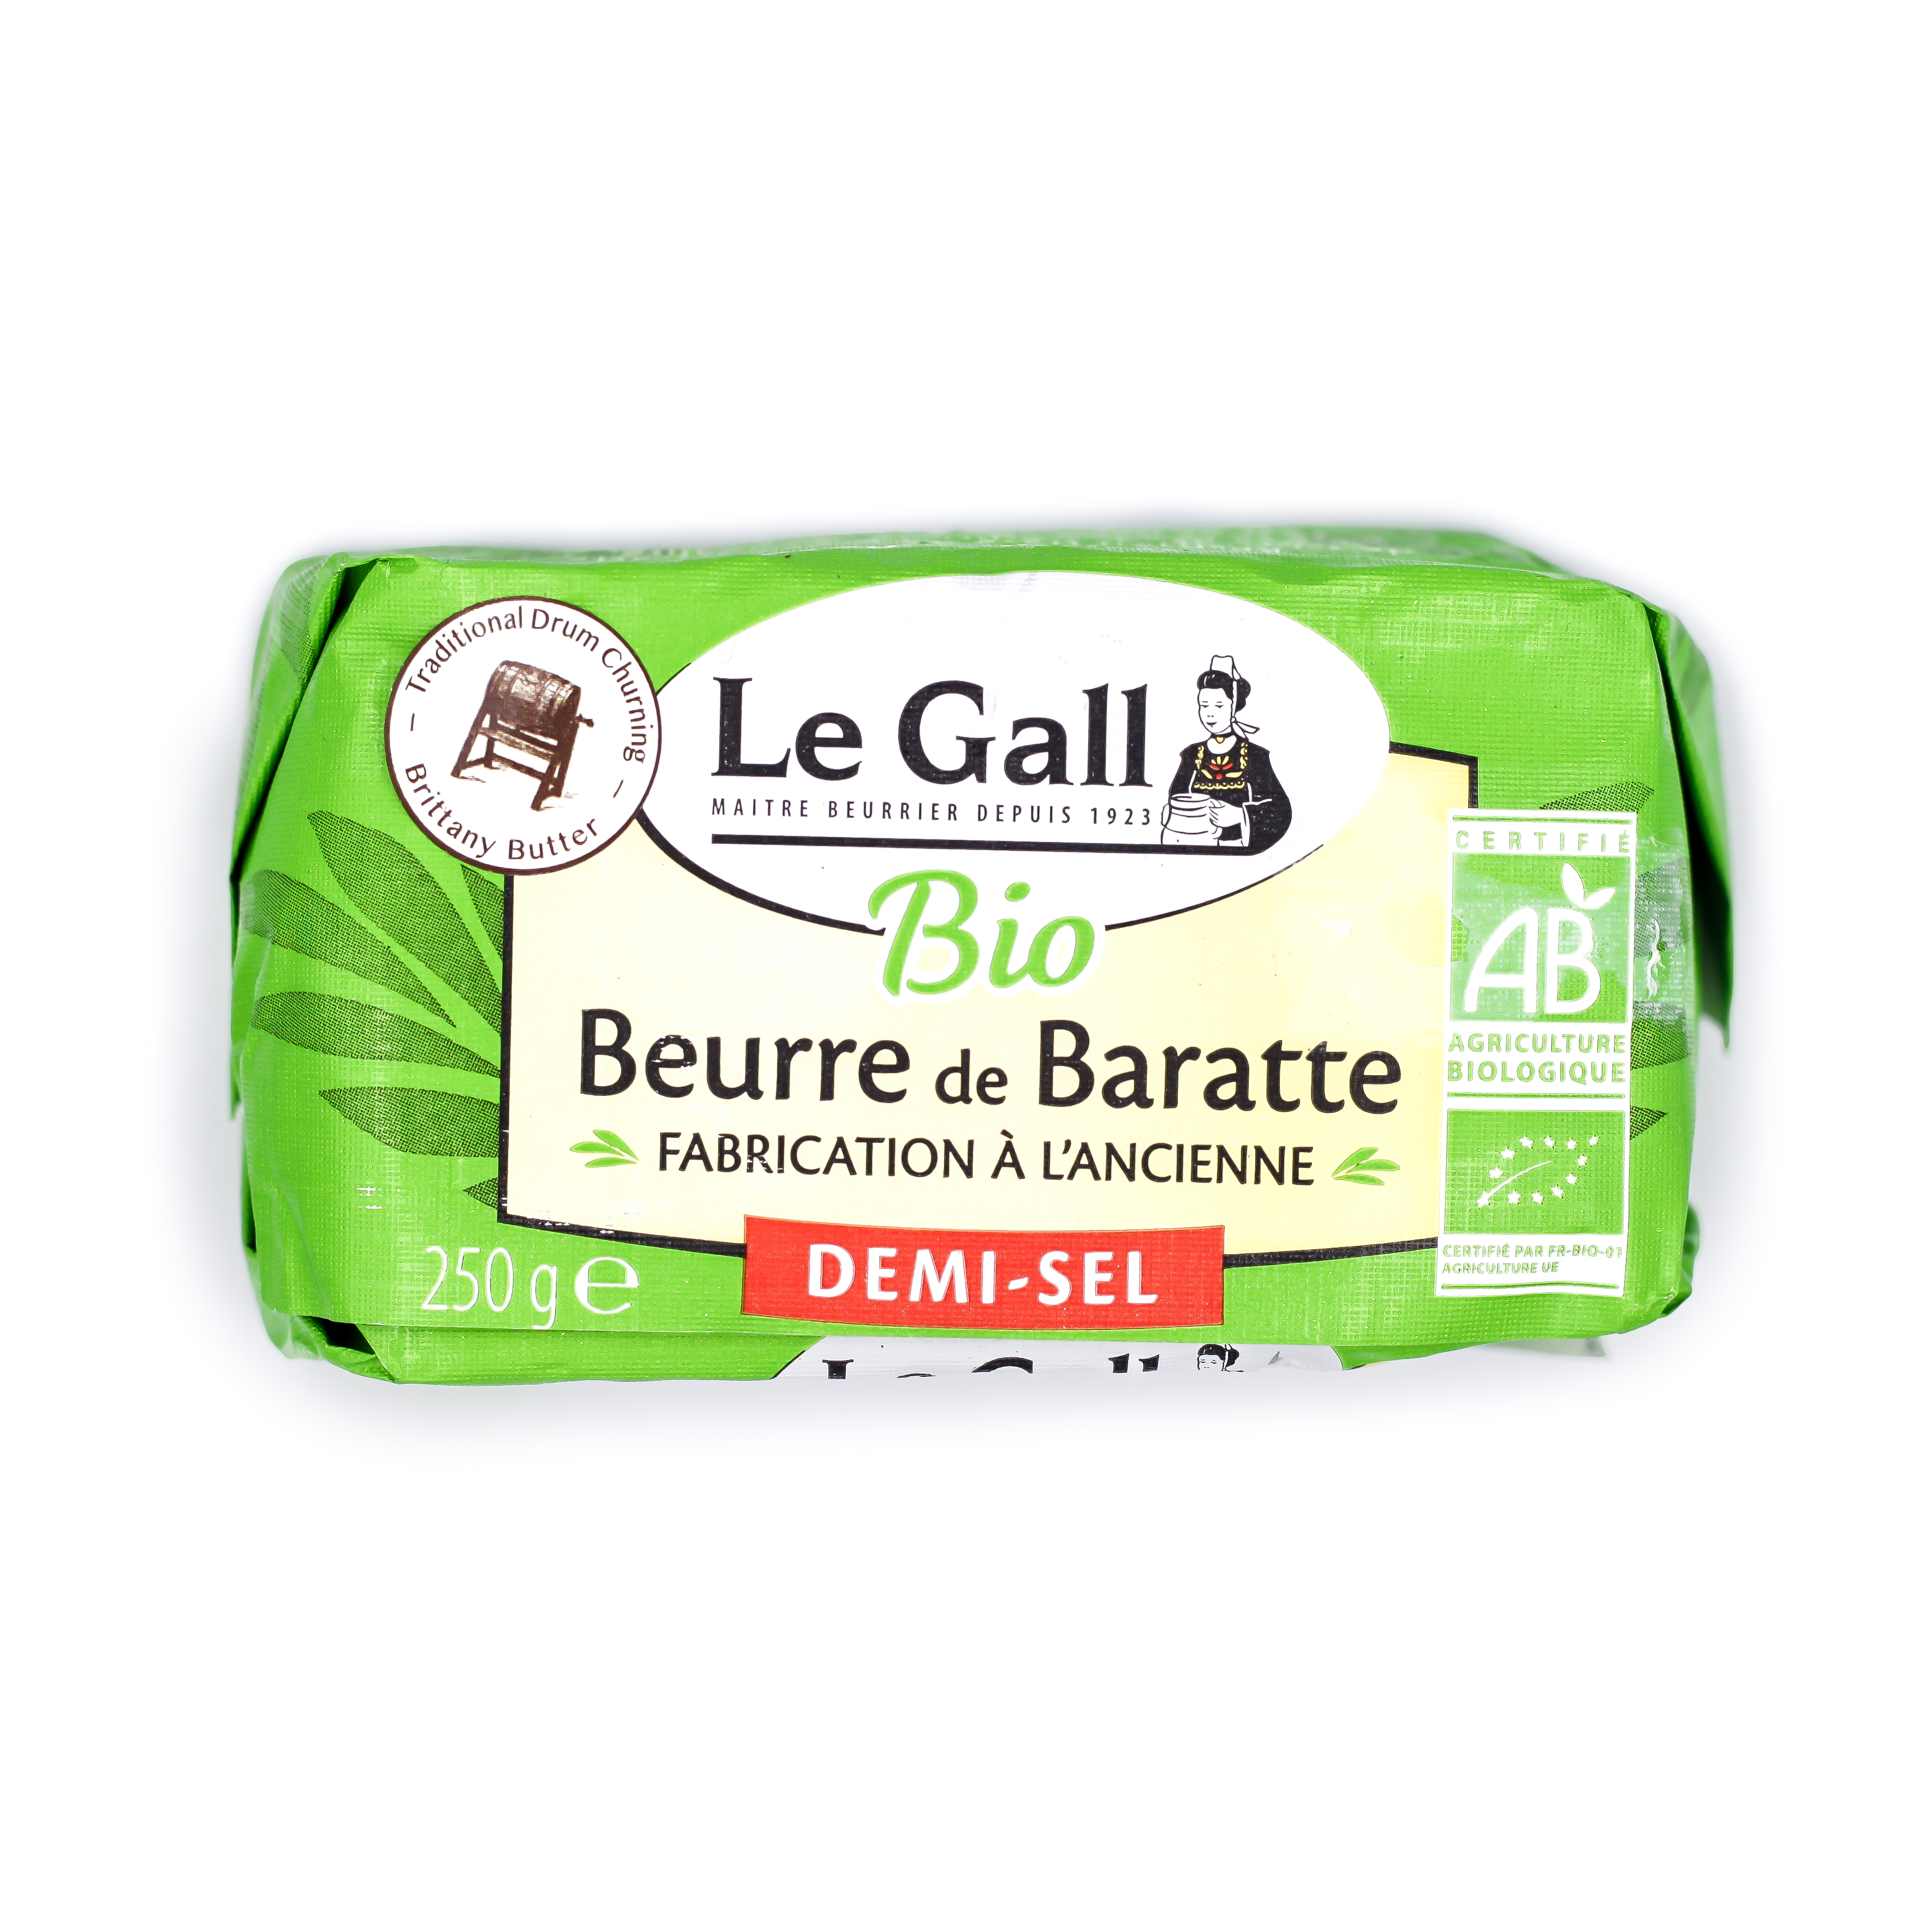 Le Gall: Organic Artisanal Churned Butter, Slightly Salted